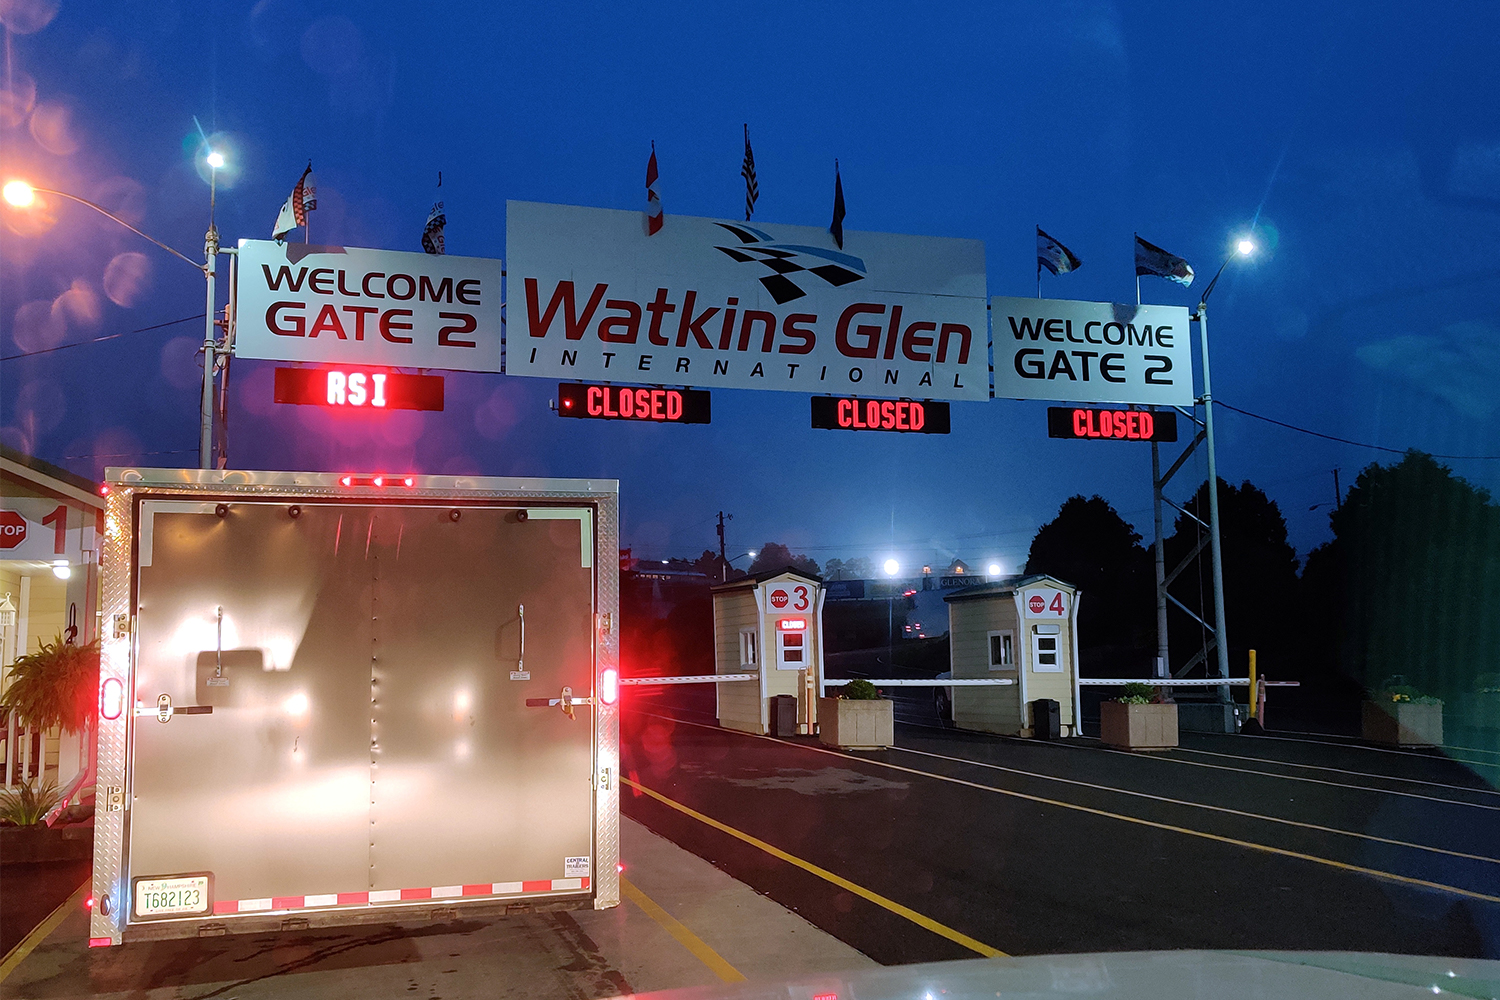 The entrance to Watkins Glen International, one of the oldest road courses in the U.S.